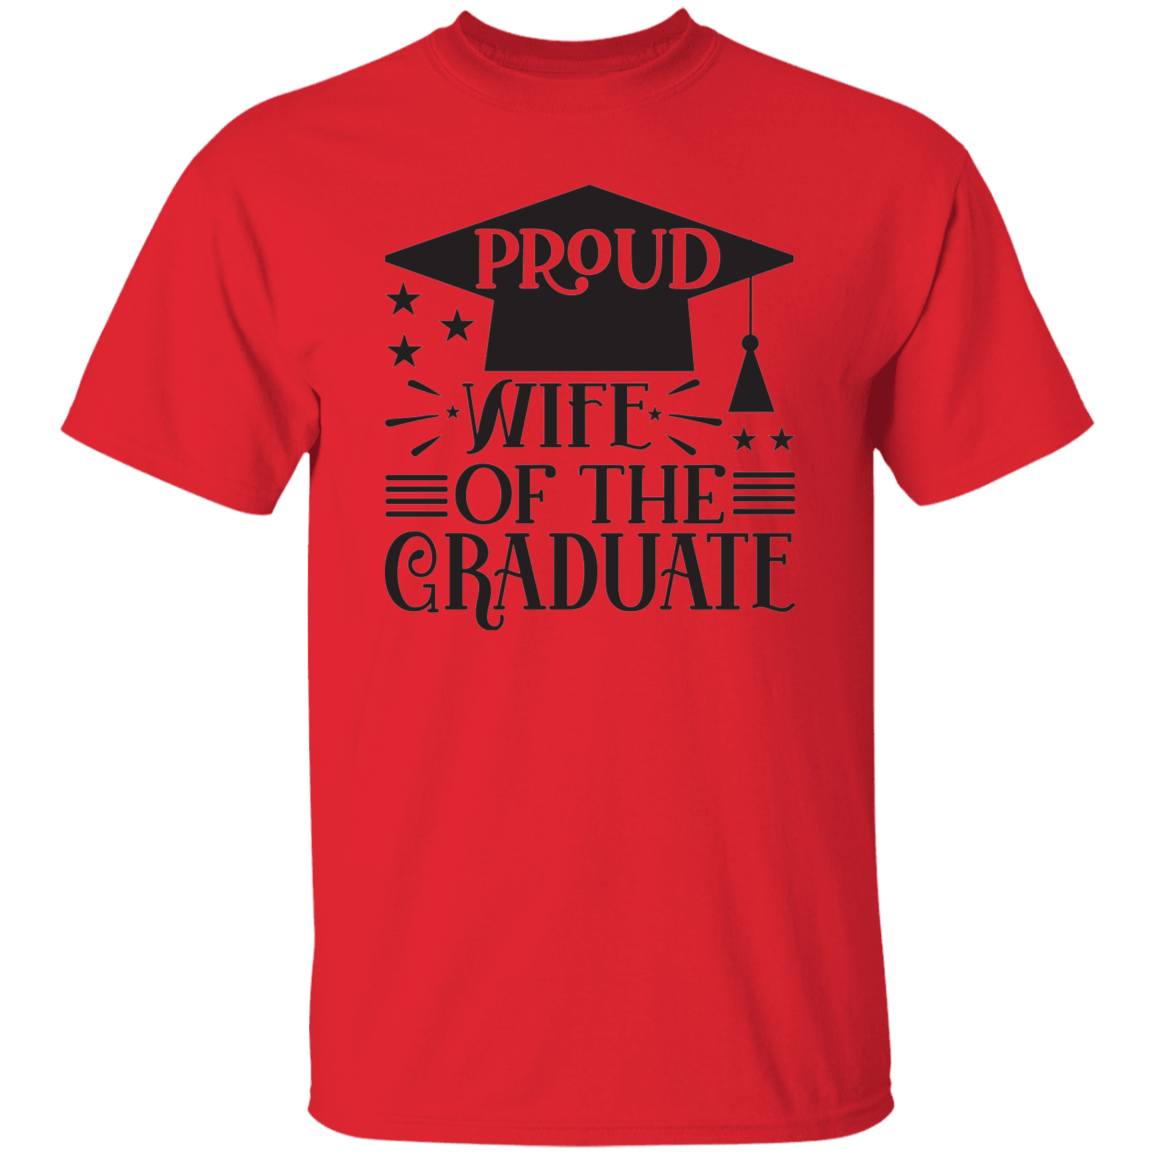 Wife of the Graduate 5.3 oz. T-Shirt